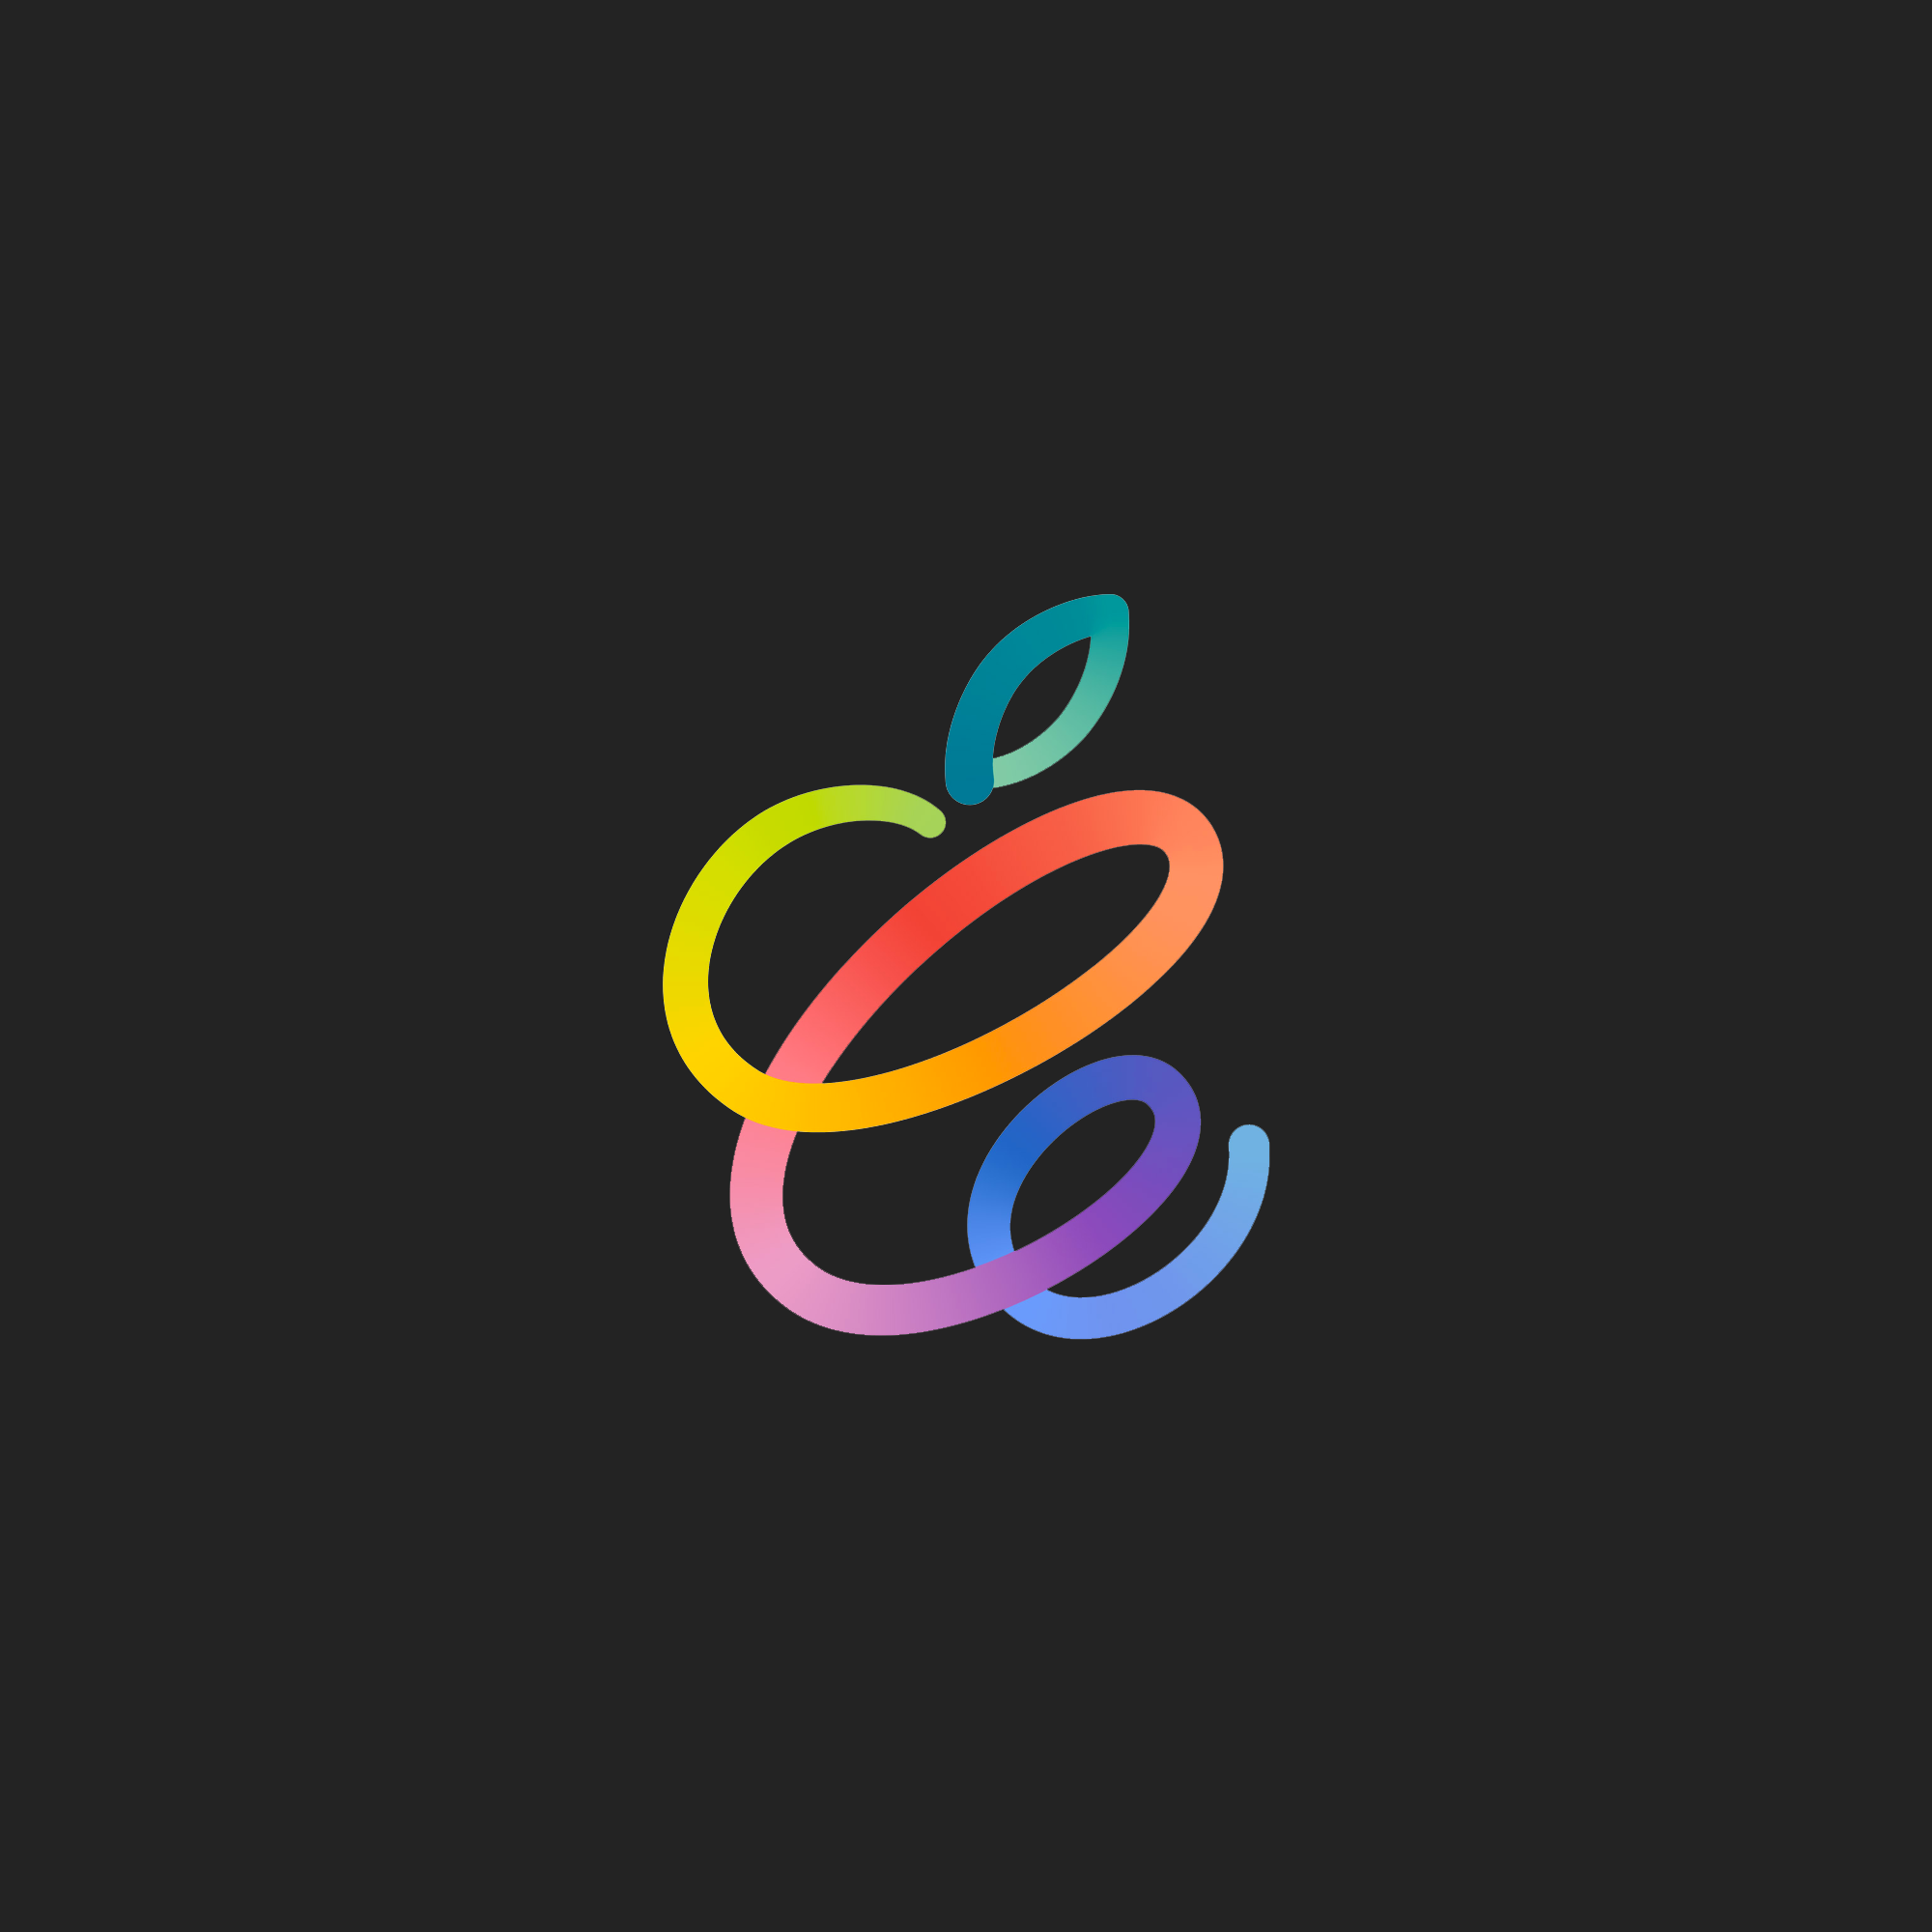 Apple Event “Spring Loaded” - Dark - Wallpapers Central